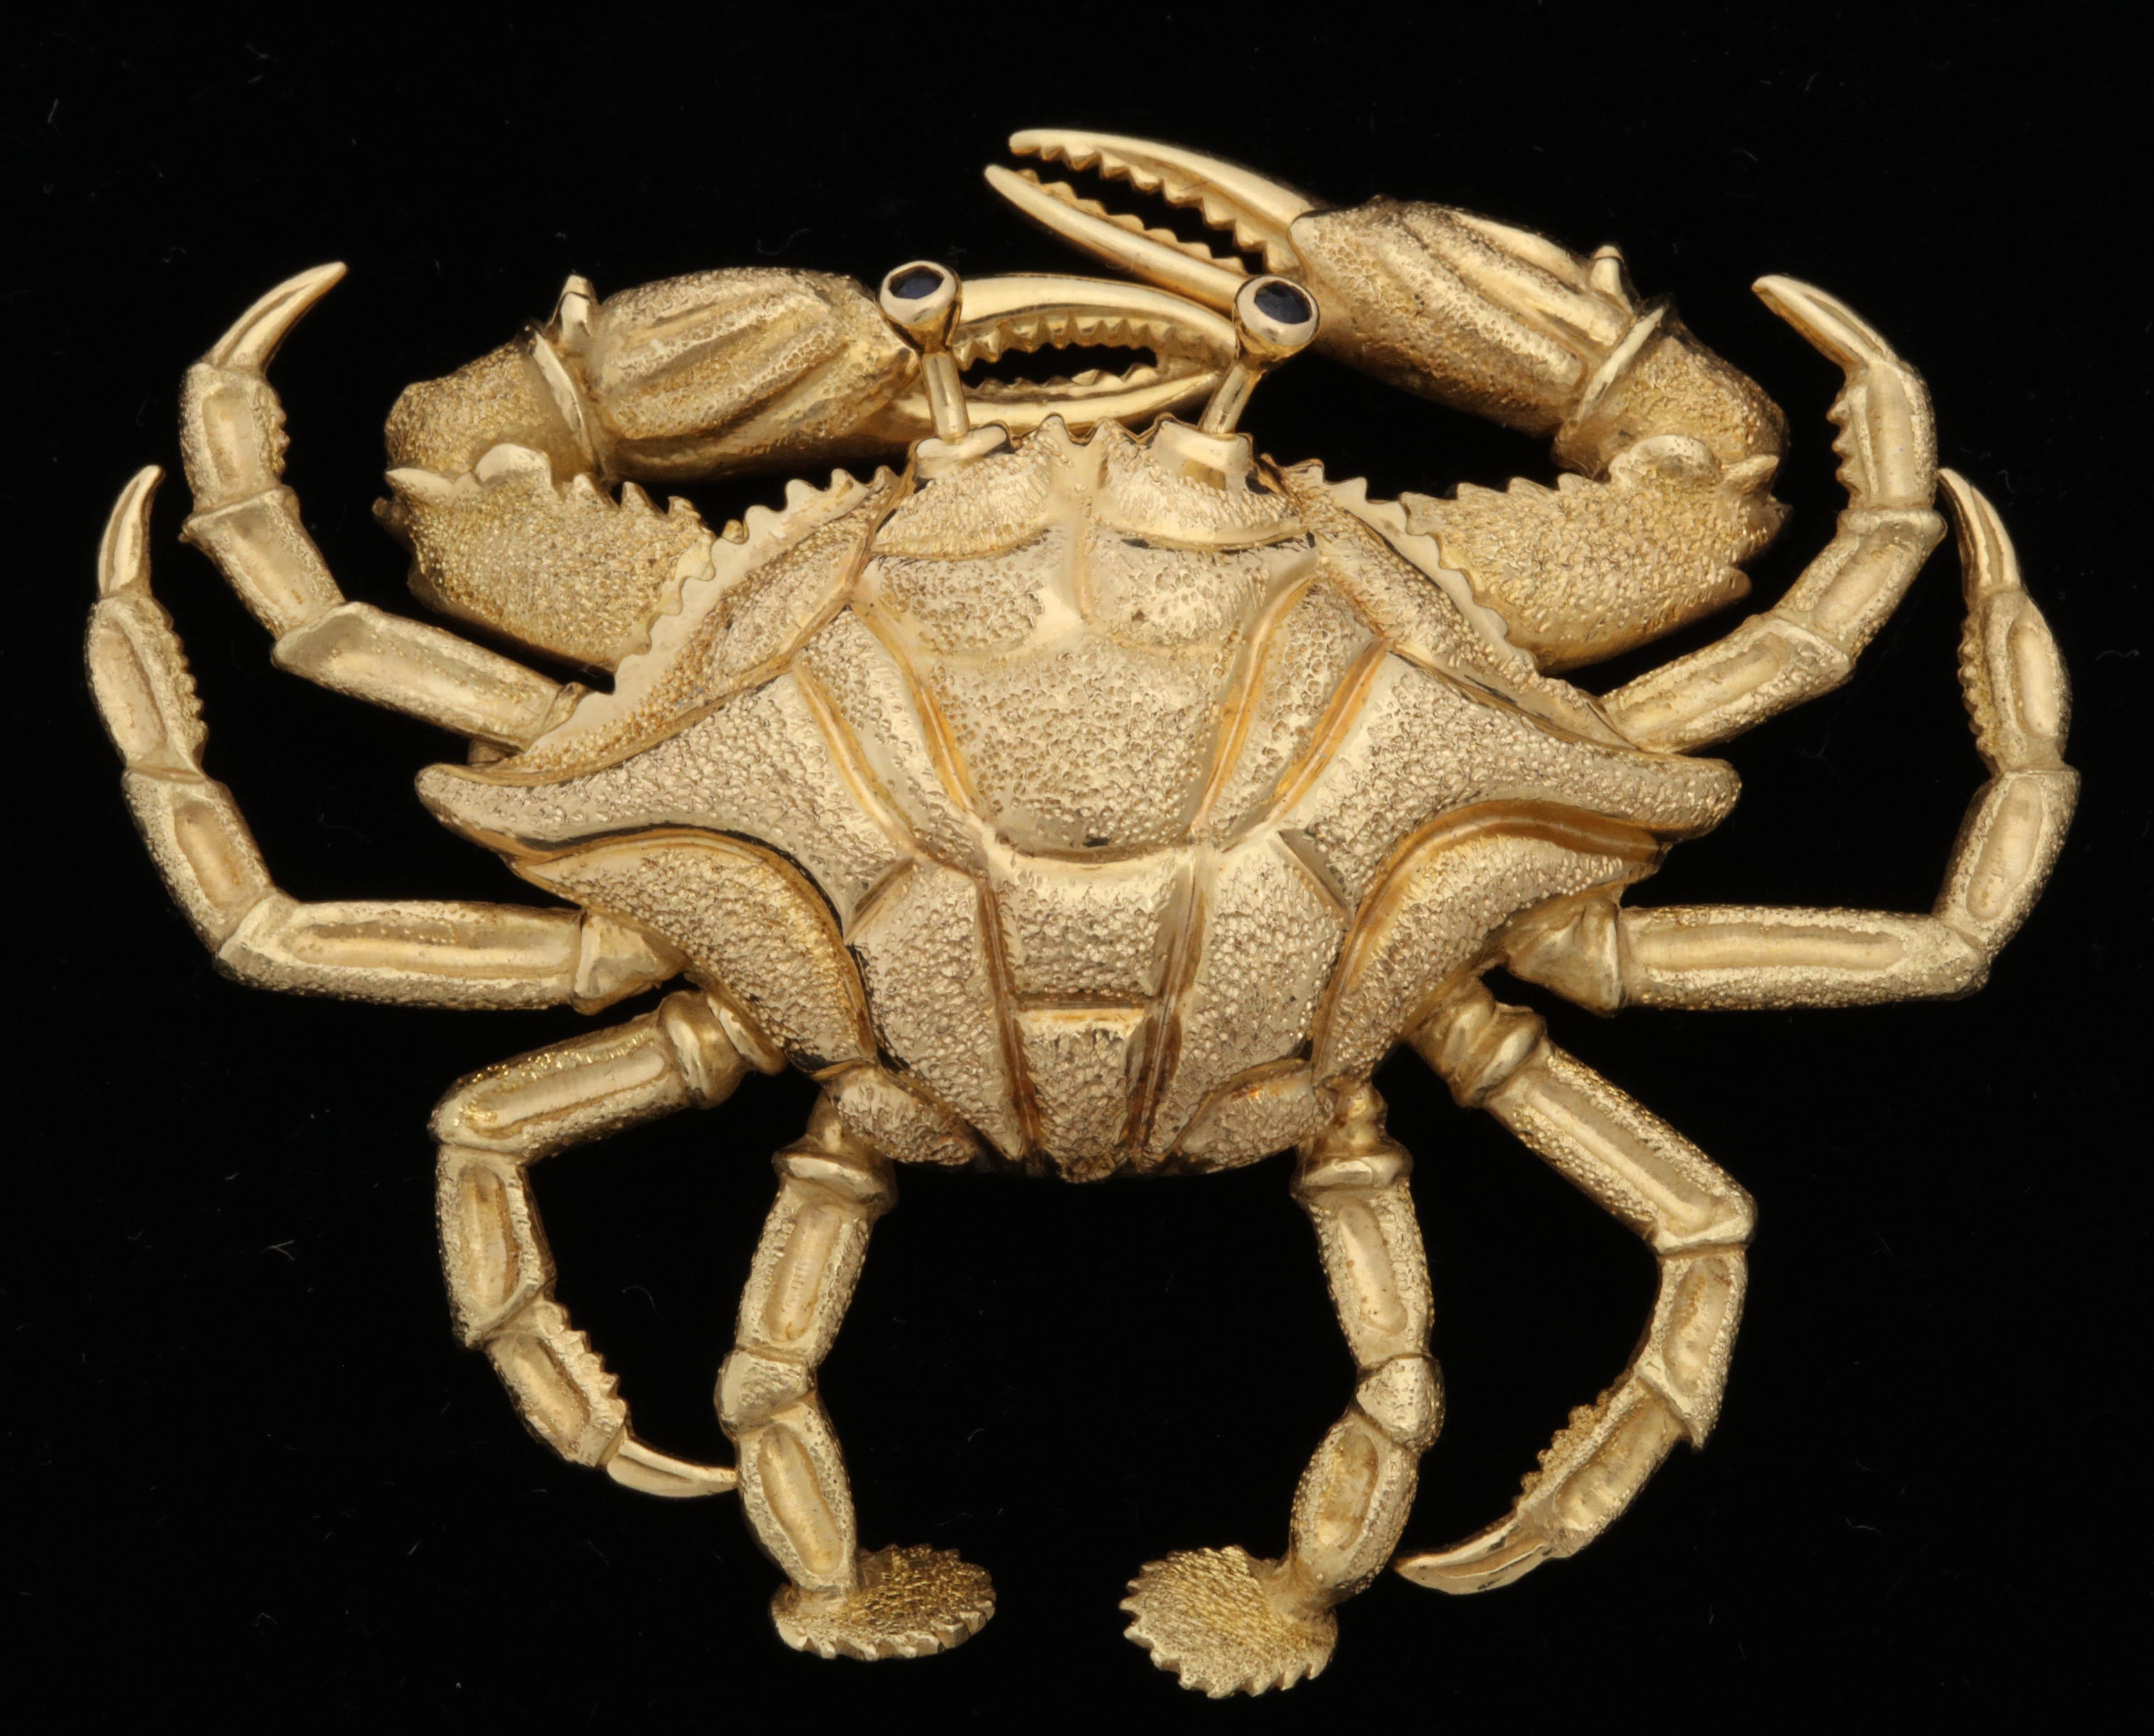 One Large Figural And Adorable Crab Brooch Designed in 18kt Textured Yellow Gold. Eyes Created With Two Faceted Sapphires. Made In The 1960's In The United States Of America.Perfect For The Astrological Sign Of Cancer June 22-July 21.The Perfect